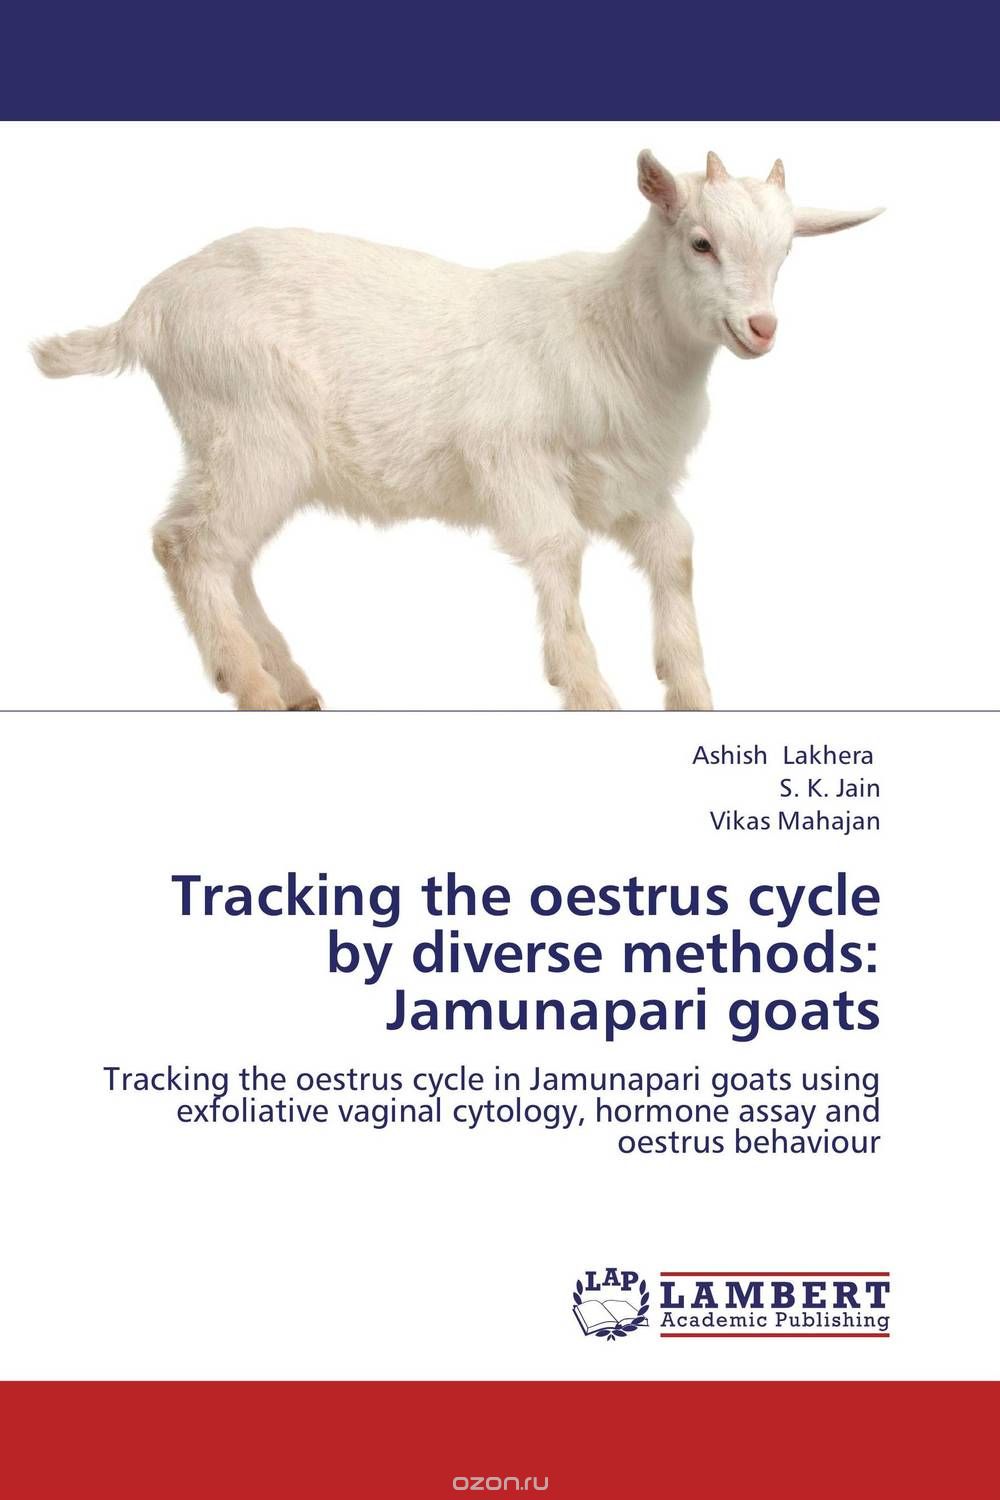 Tracking the oestrus cycle by diverse methods: Jamunapari goats